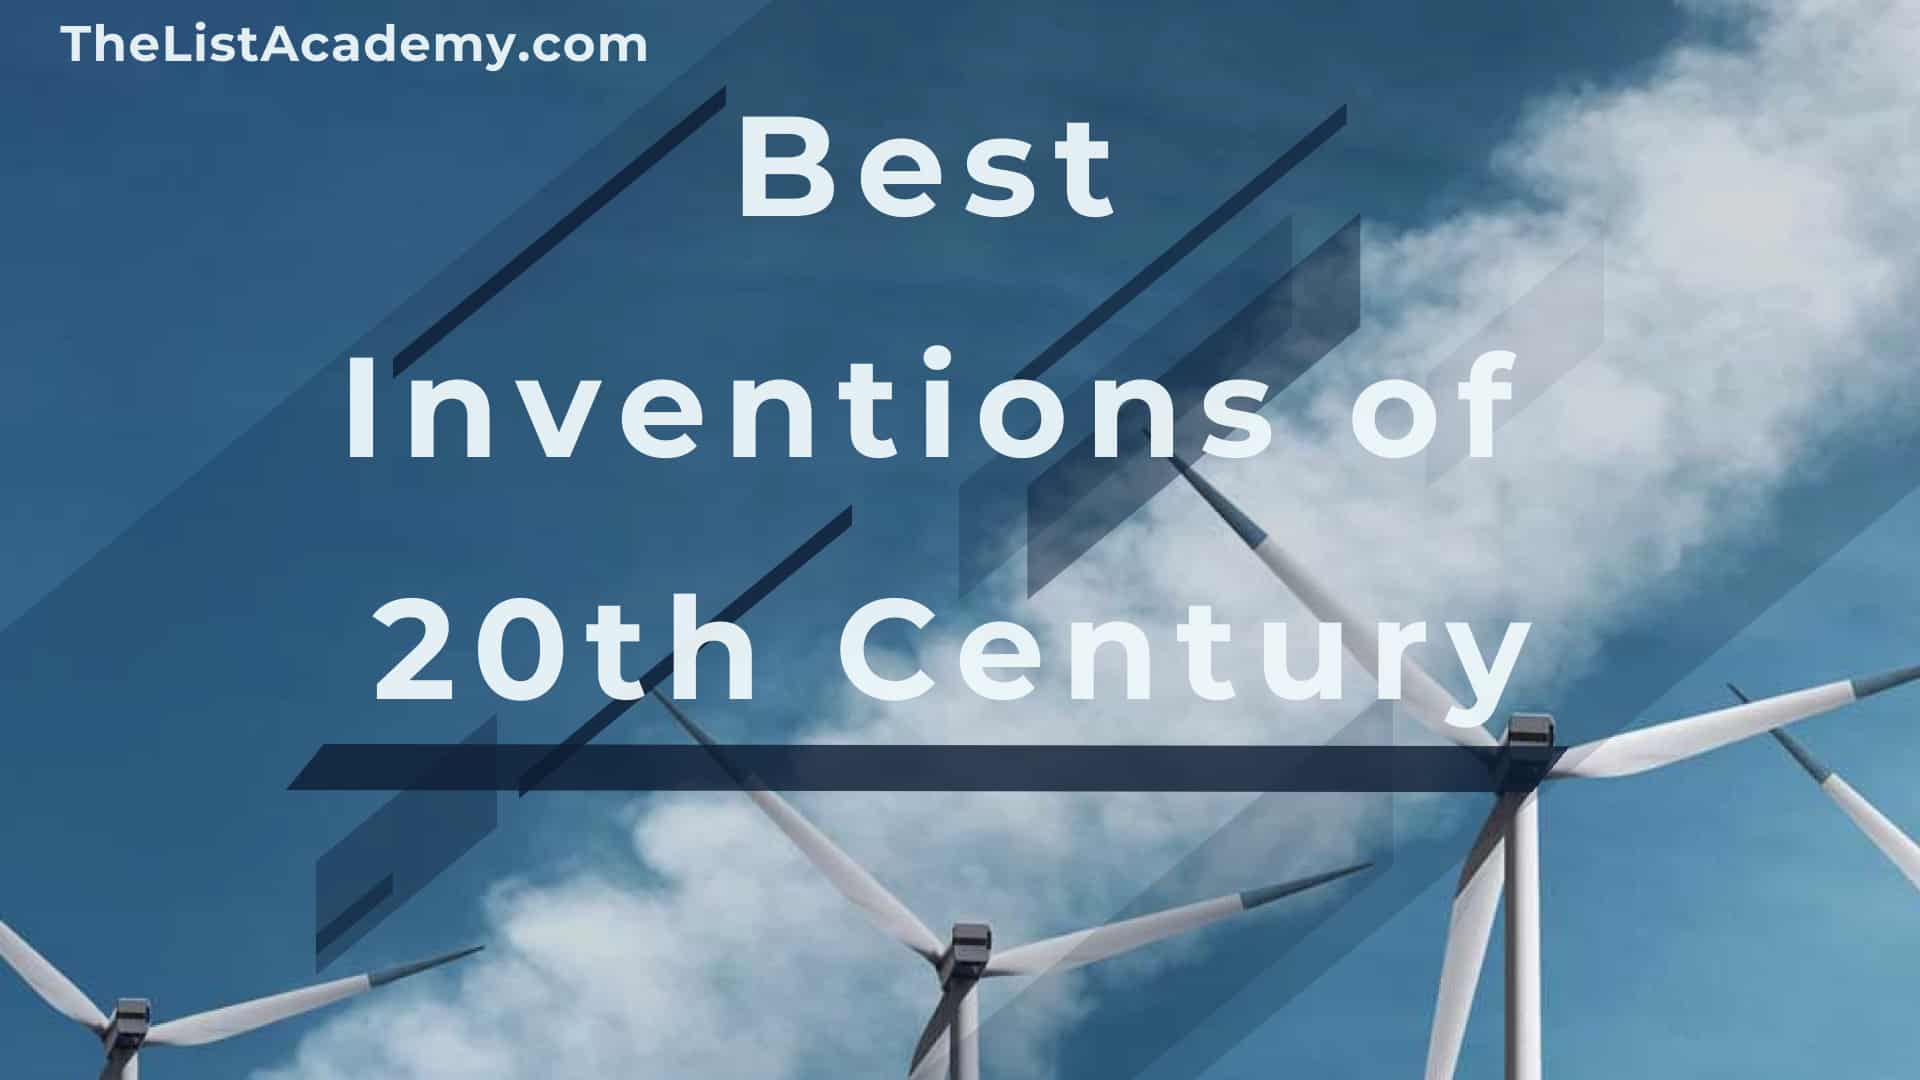 Cover Image For List : 25 Best Inventions Of 20th Century